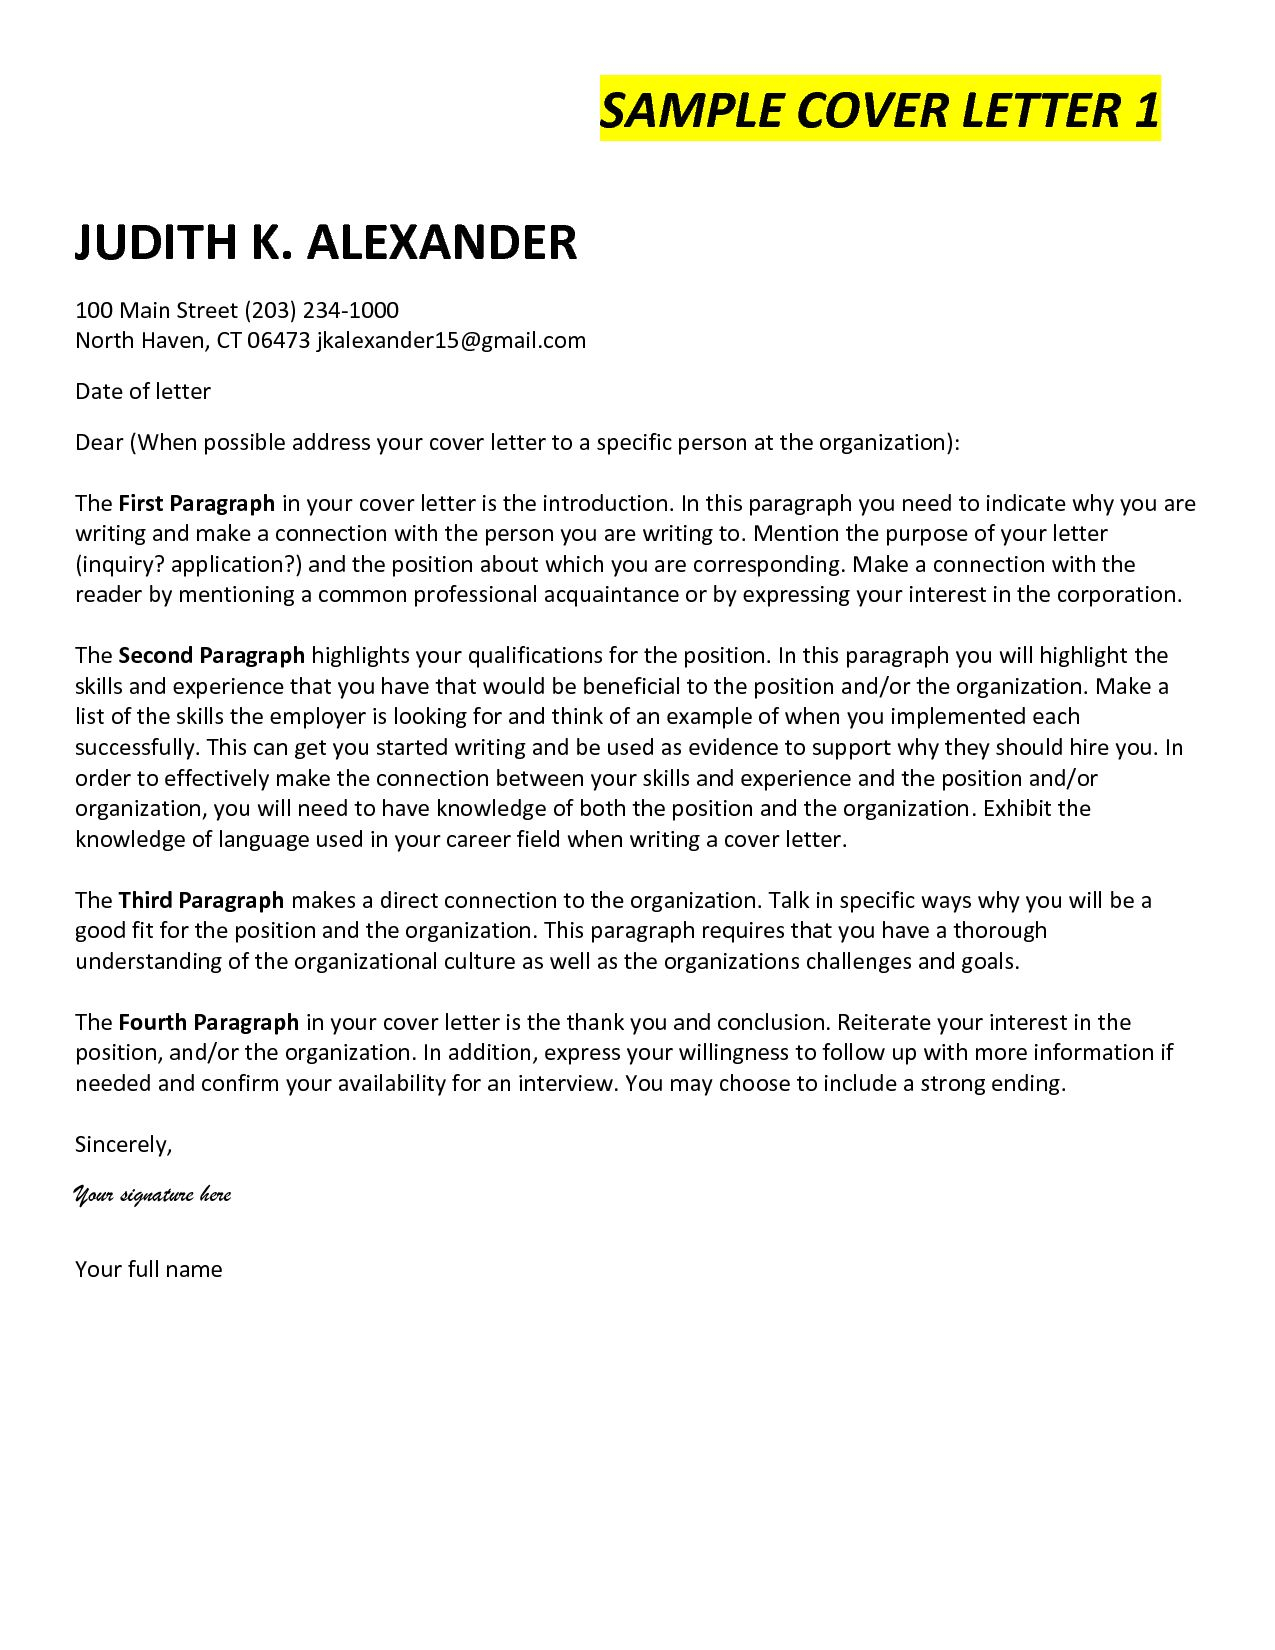 25 Cover Letter Ending Cover Letter Cover Letter For within dimensions 1275 X 1650